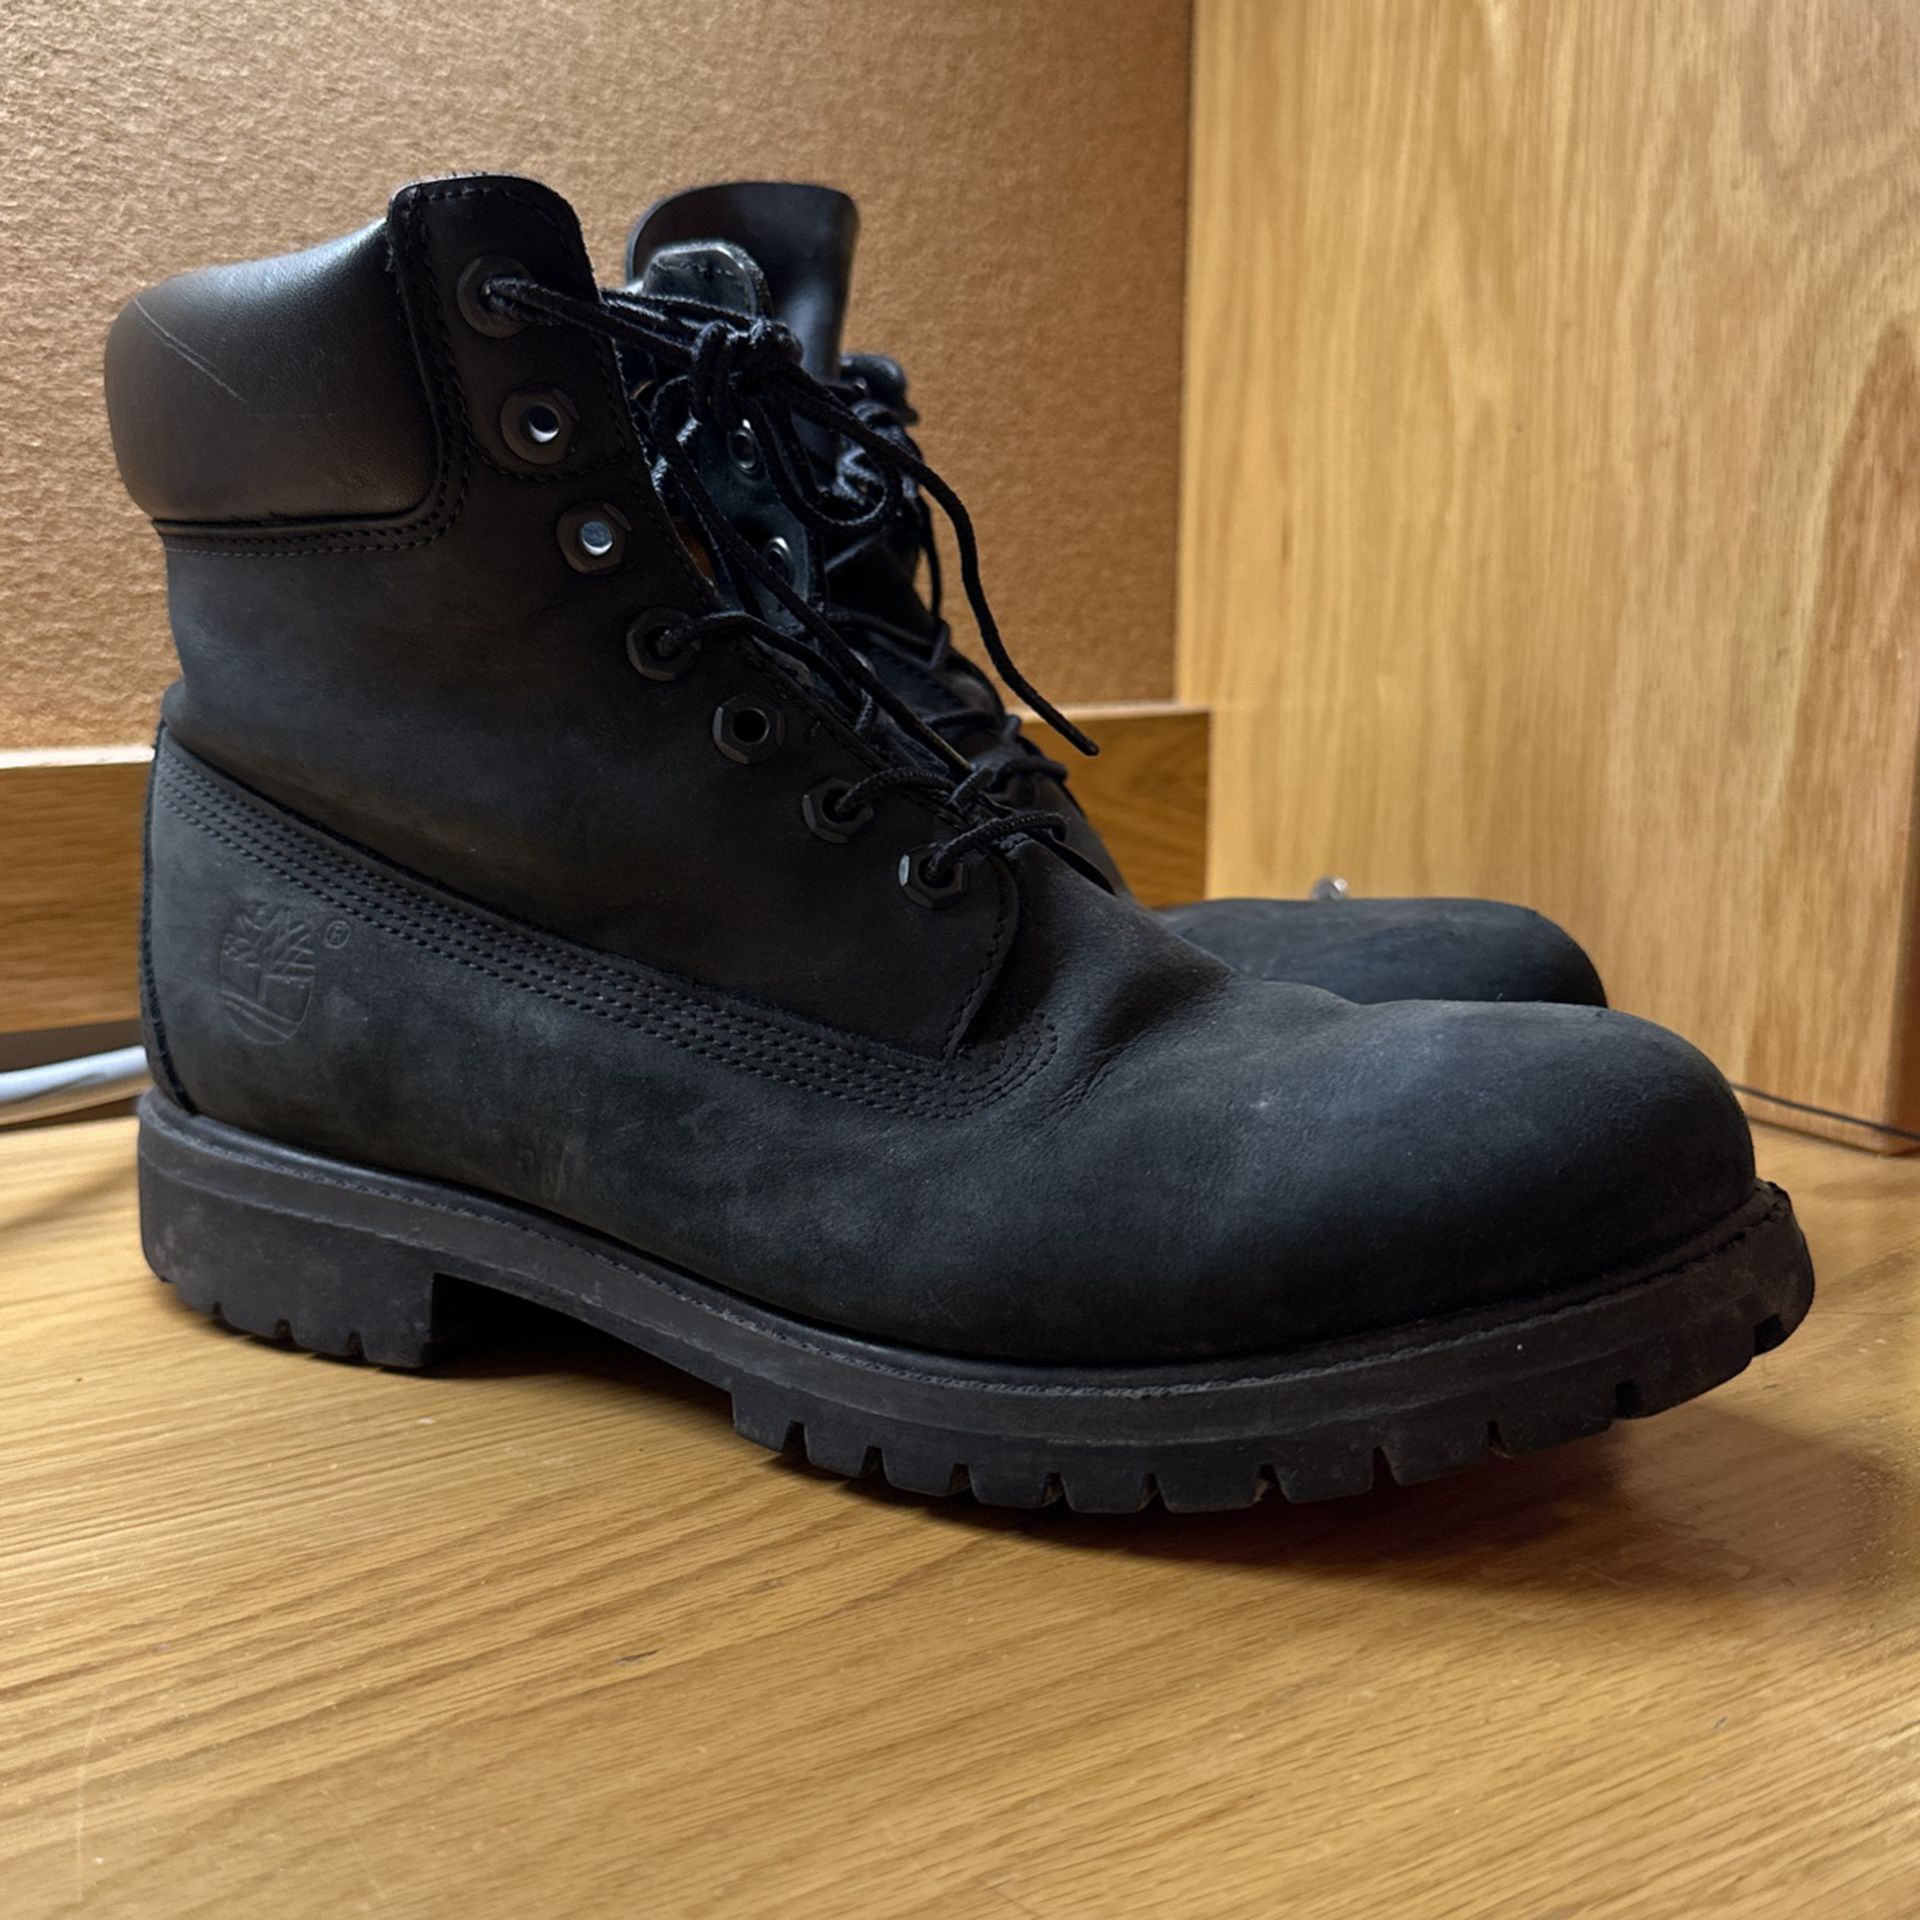 Timberland Black Suede Boots Size 10